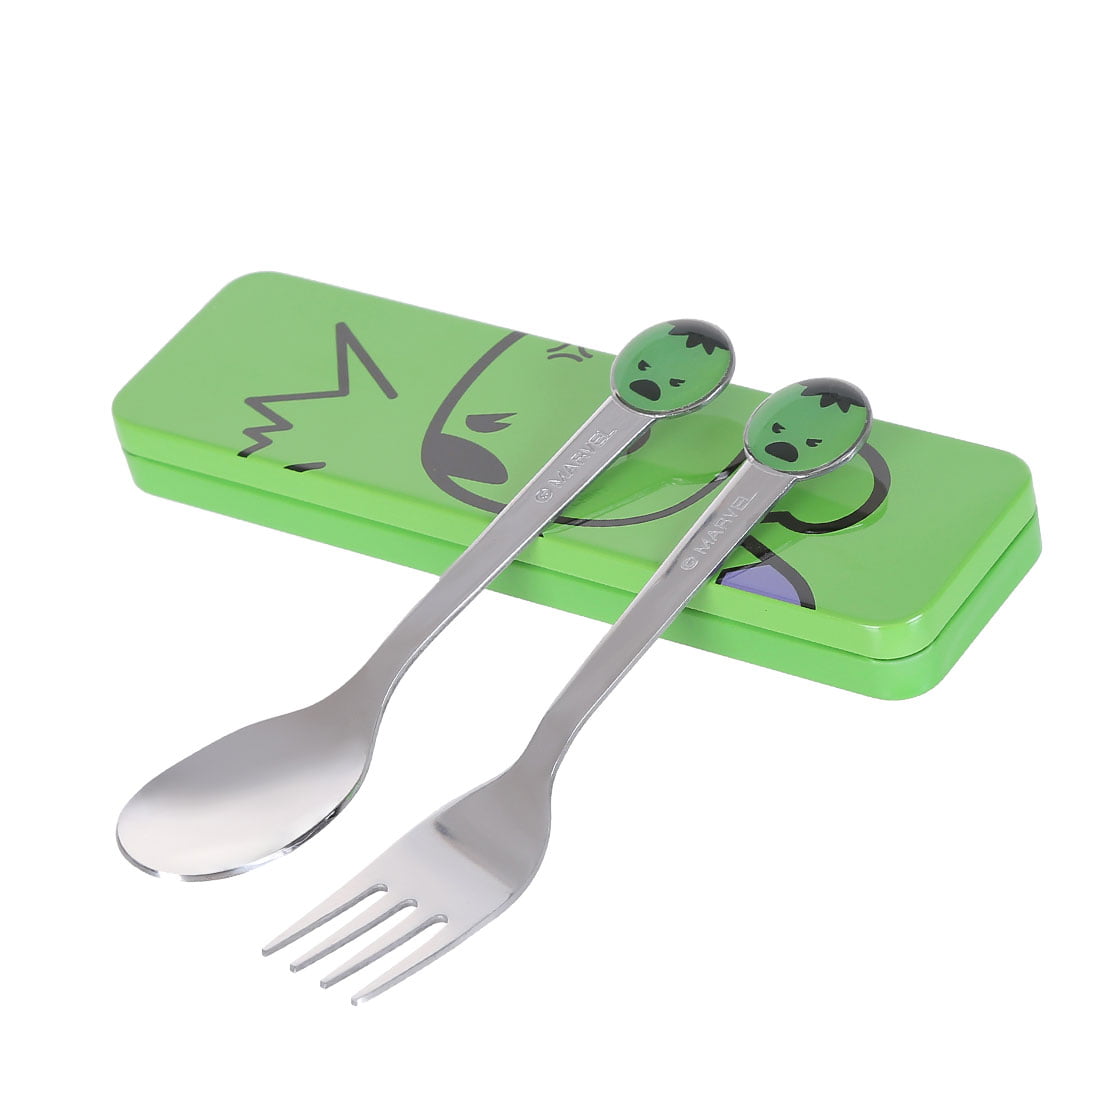 MINISO Cute Cactus Cutlery Set 2pcs Spoon and Fork Set Stainless Steel Silverware BPA Free,Flatware Set Utensils with Travel Case for Boys Girls Green